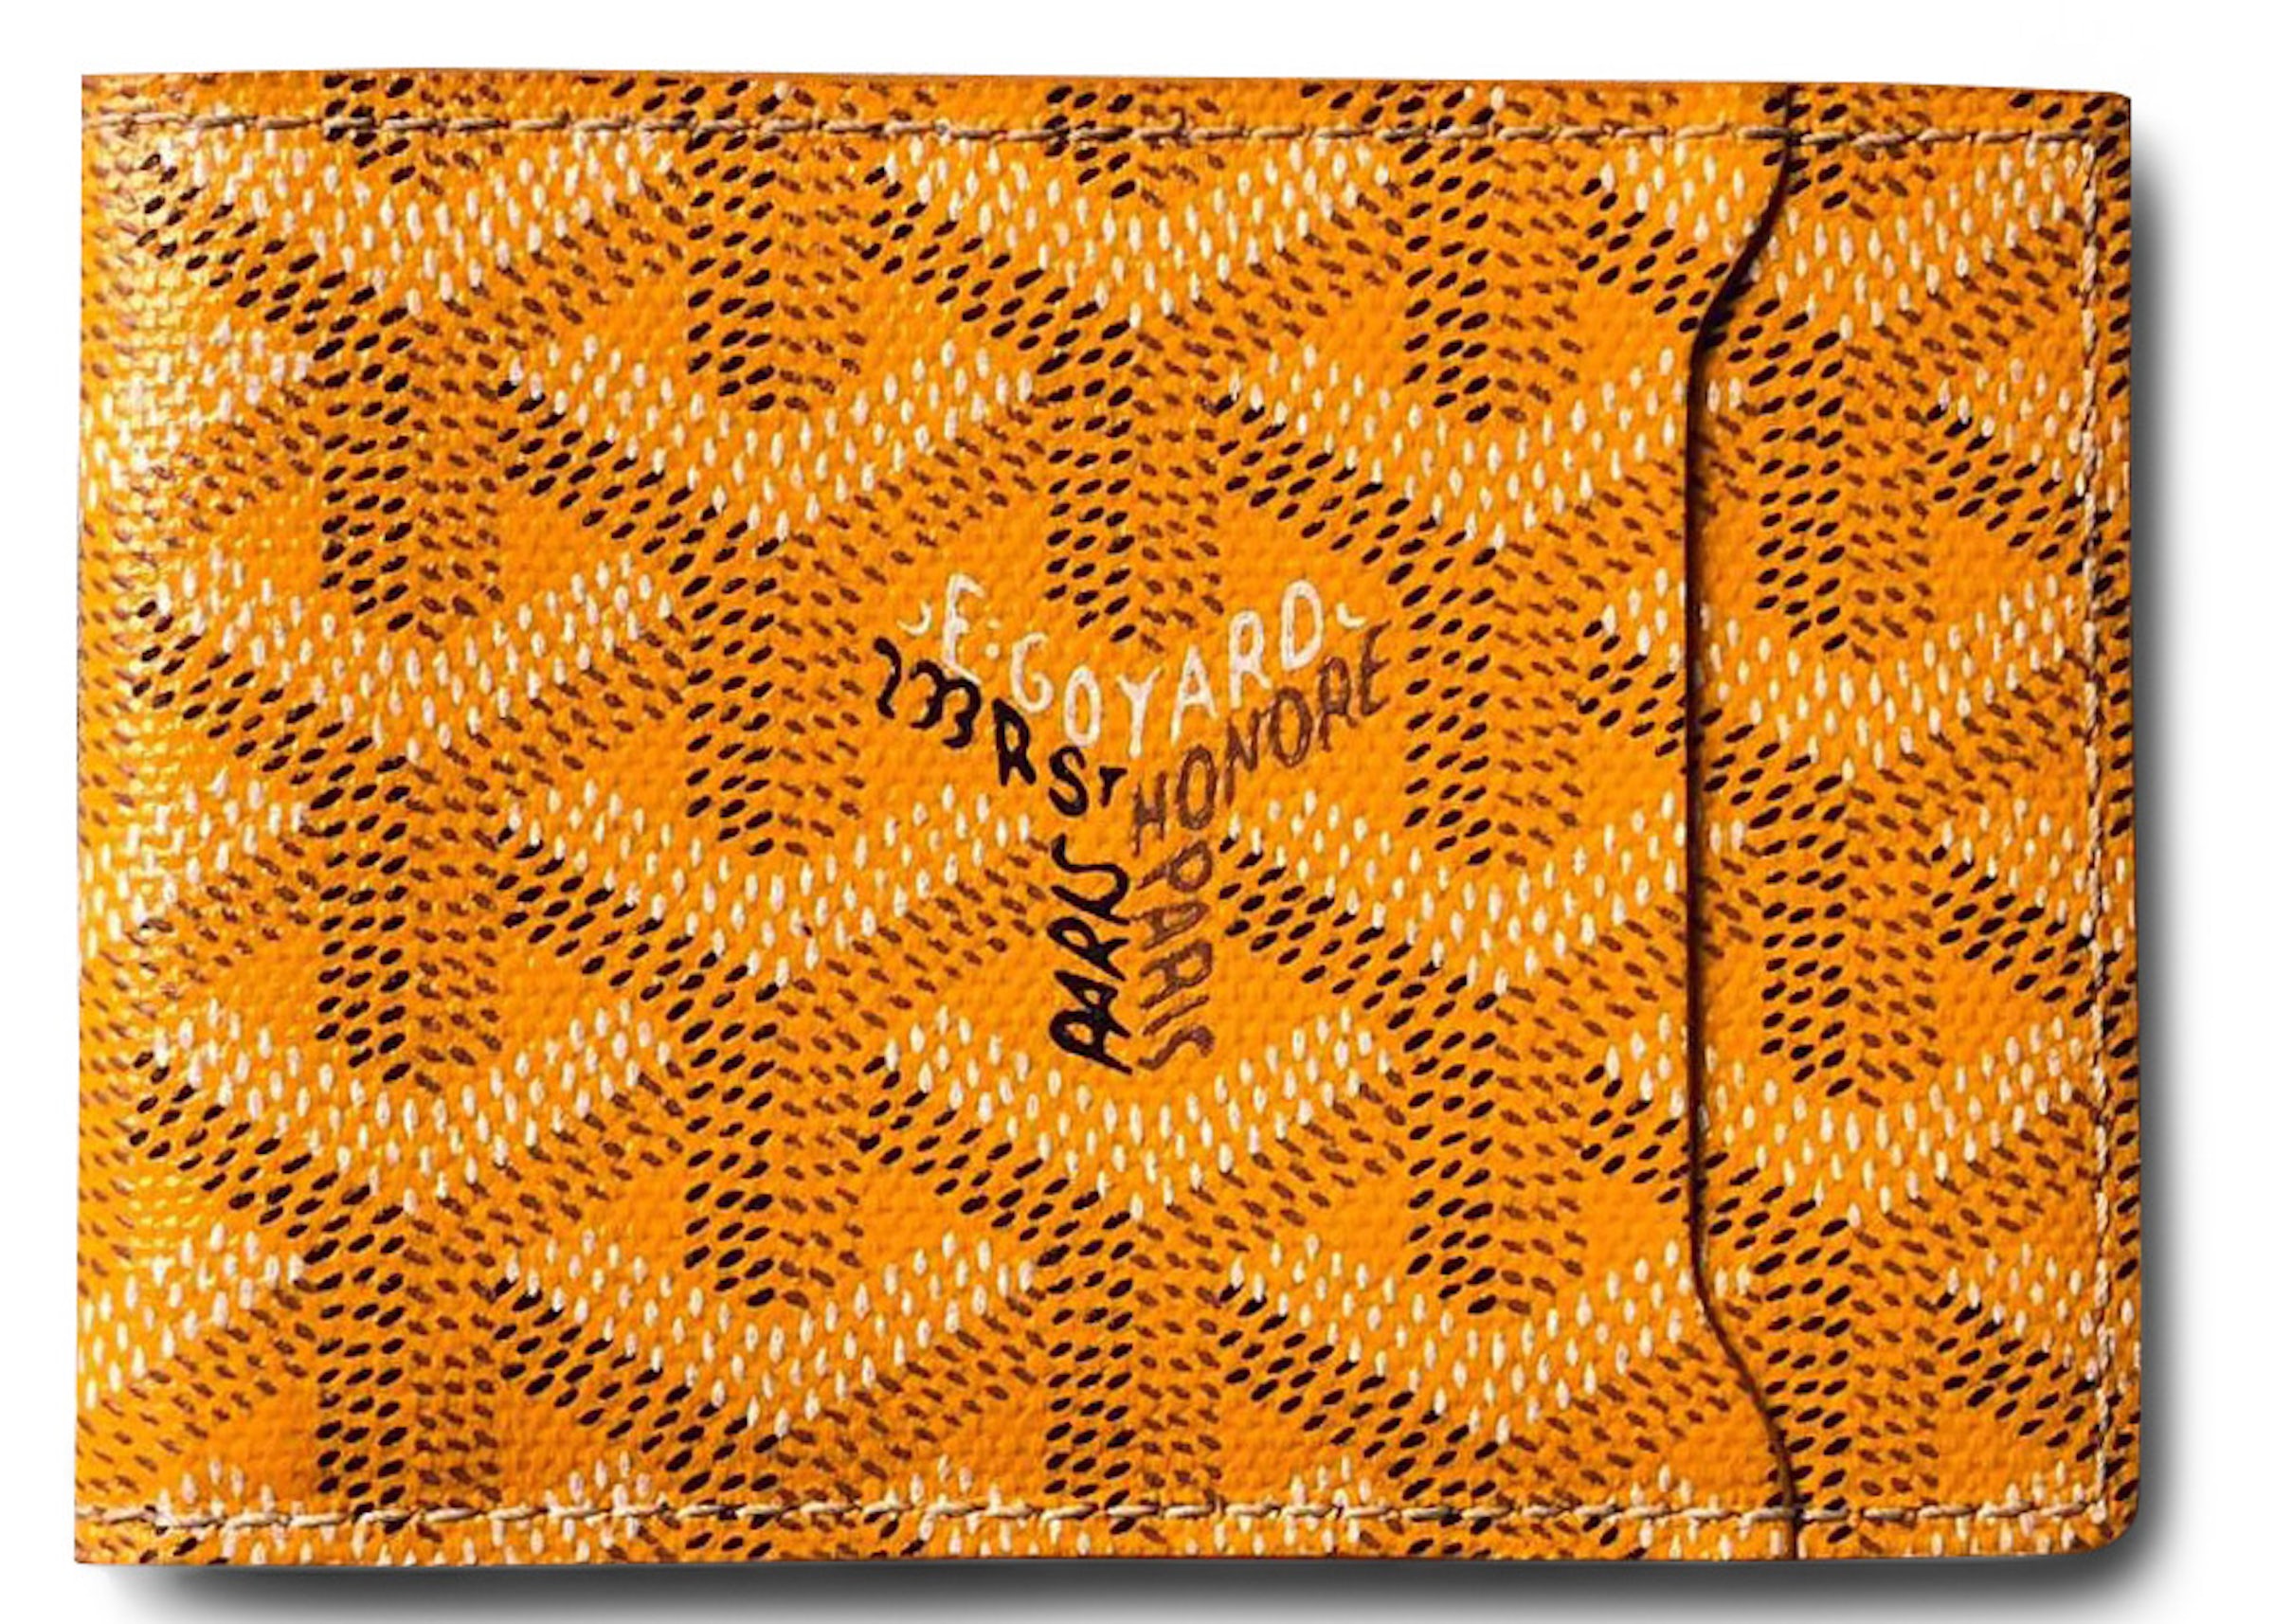 All the Different Wallets Goyard Makes - StockX News